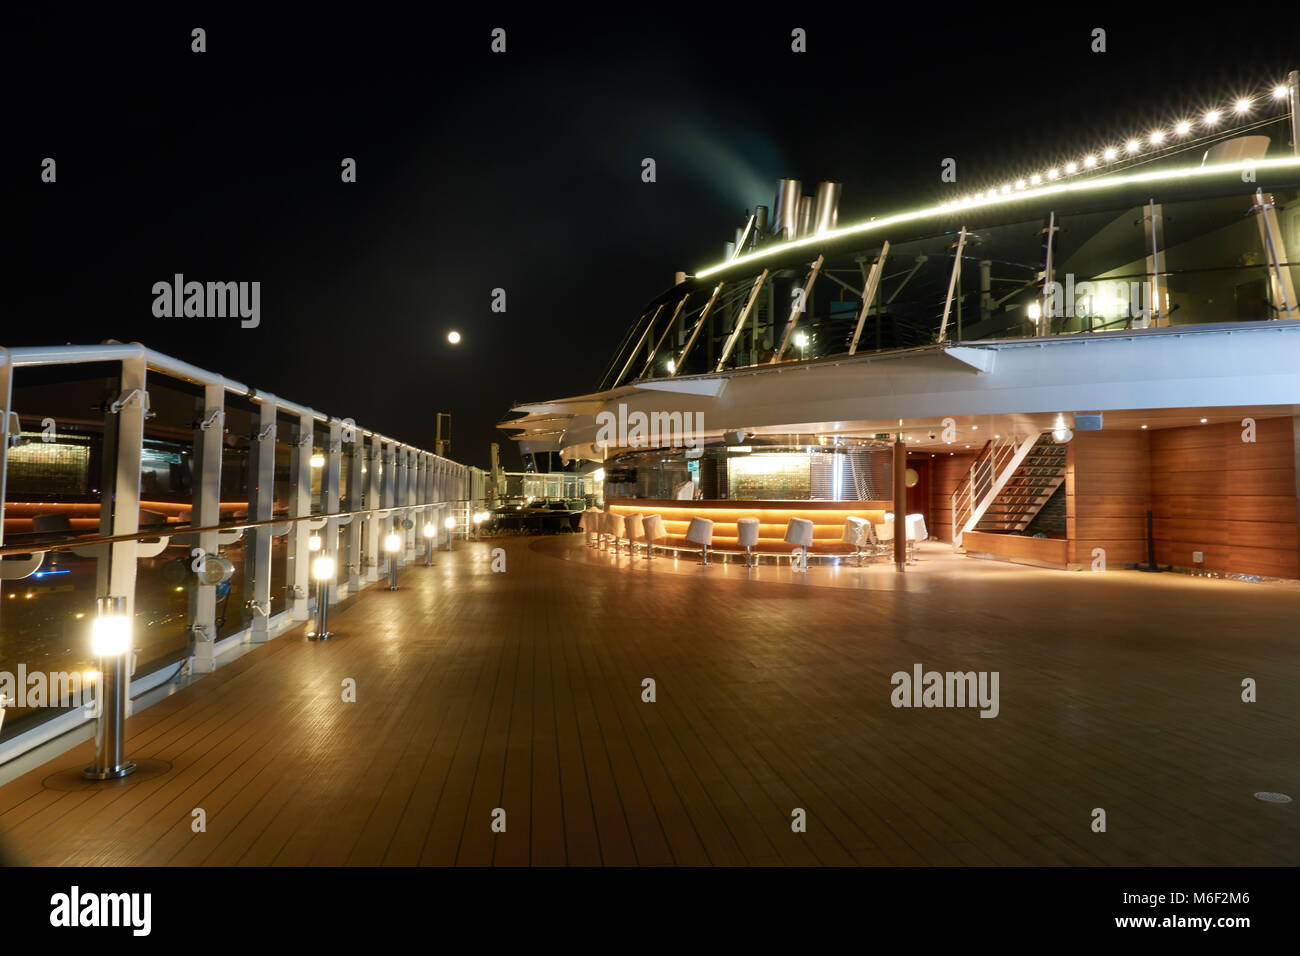 Beautiful deck of a cruise ship at night without people. Stock Photo